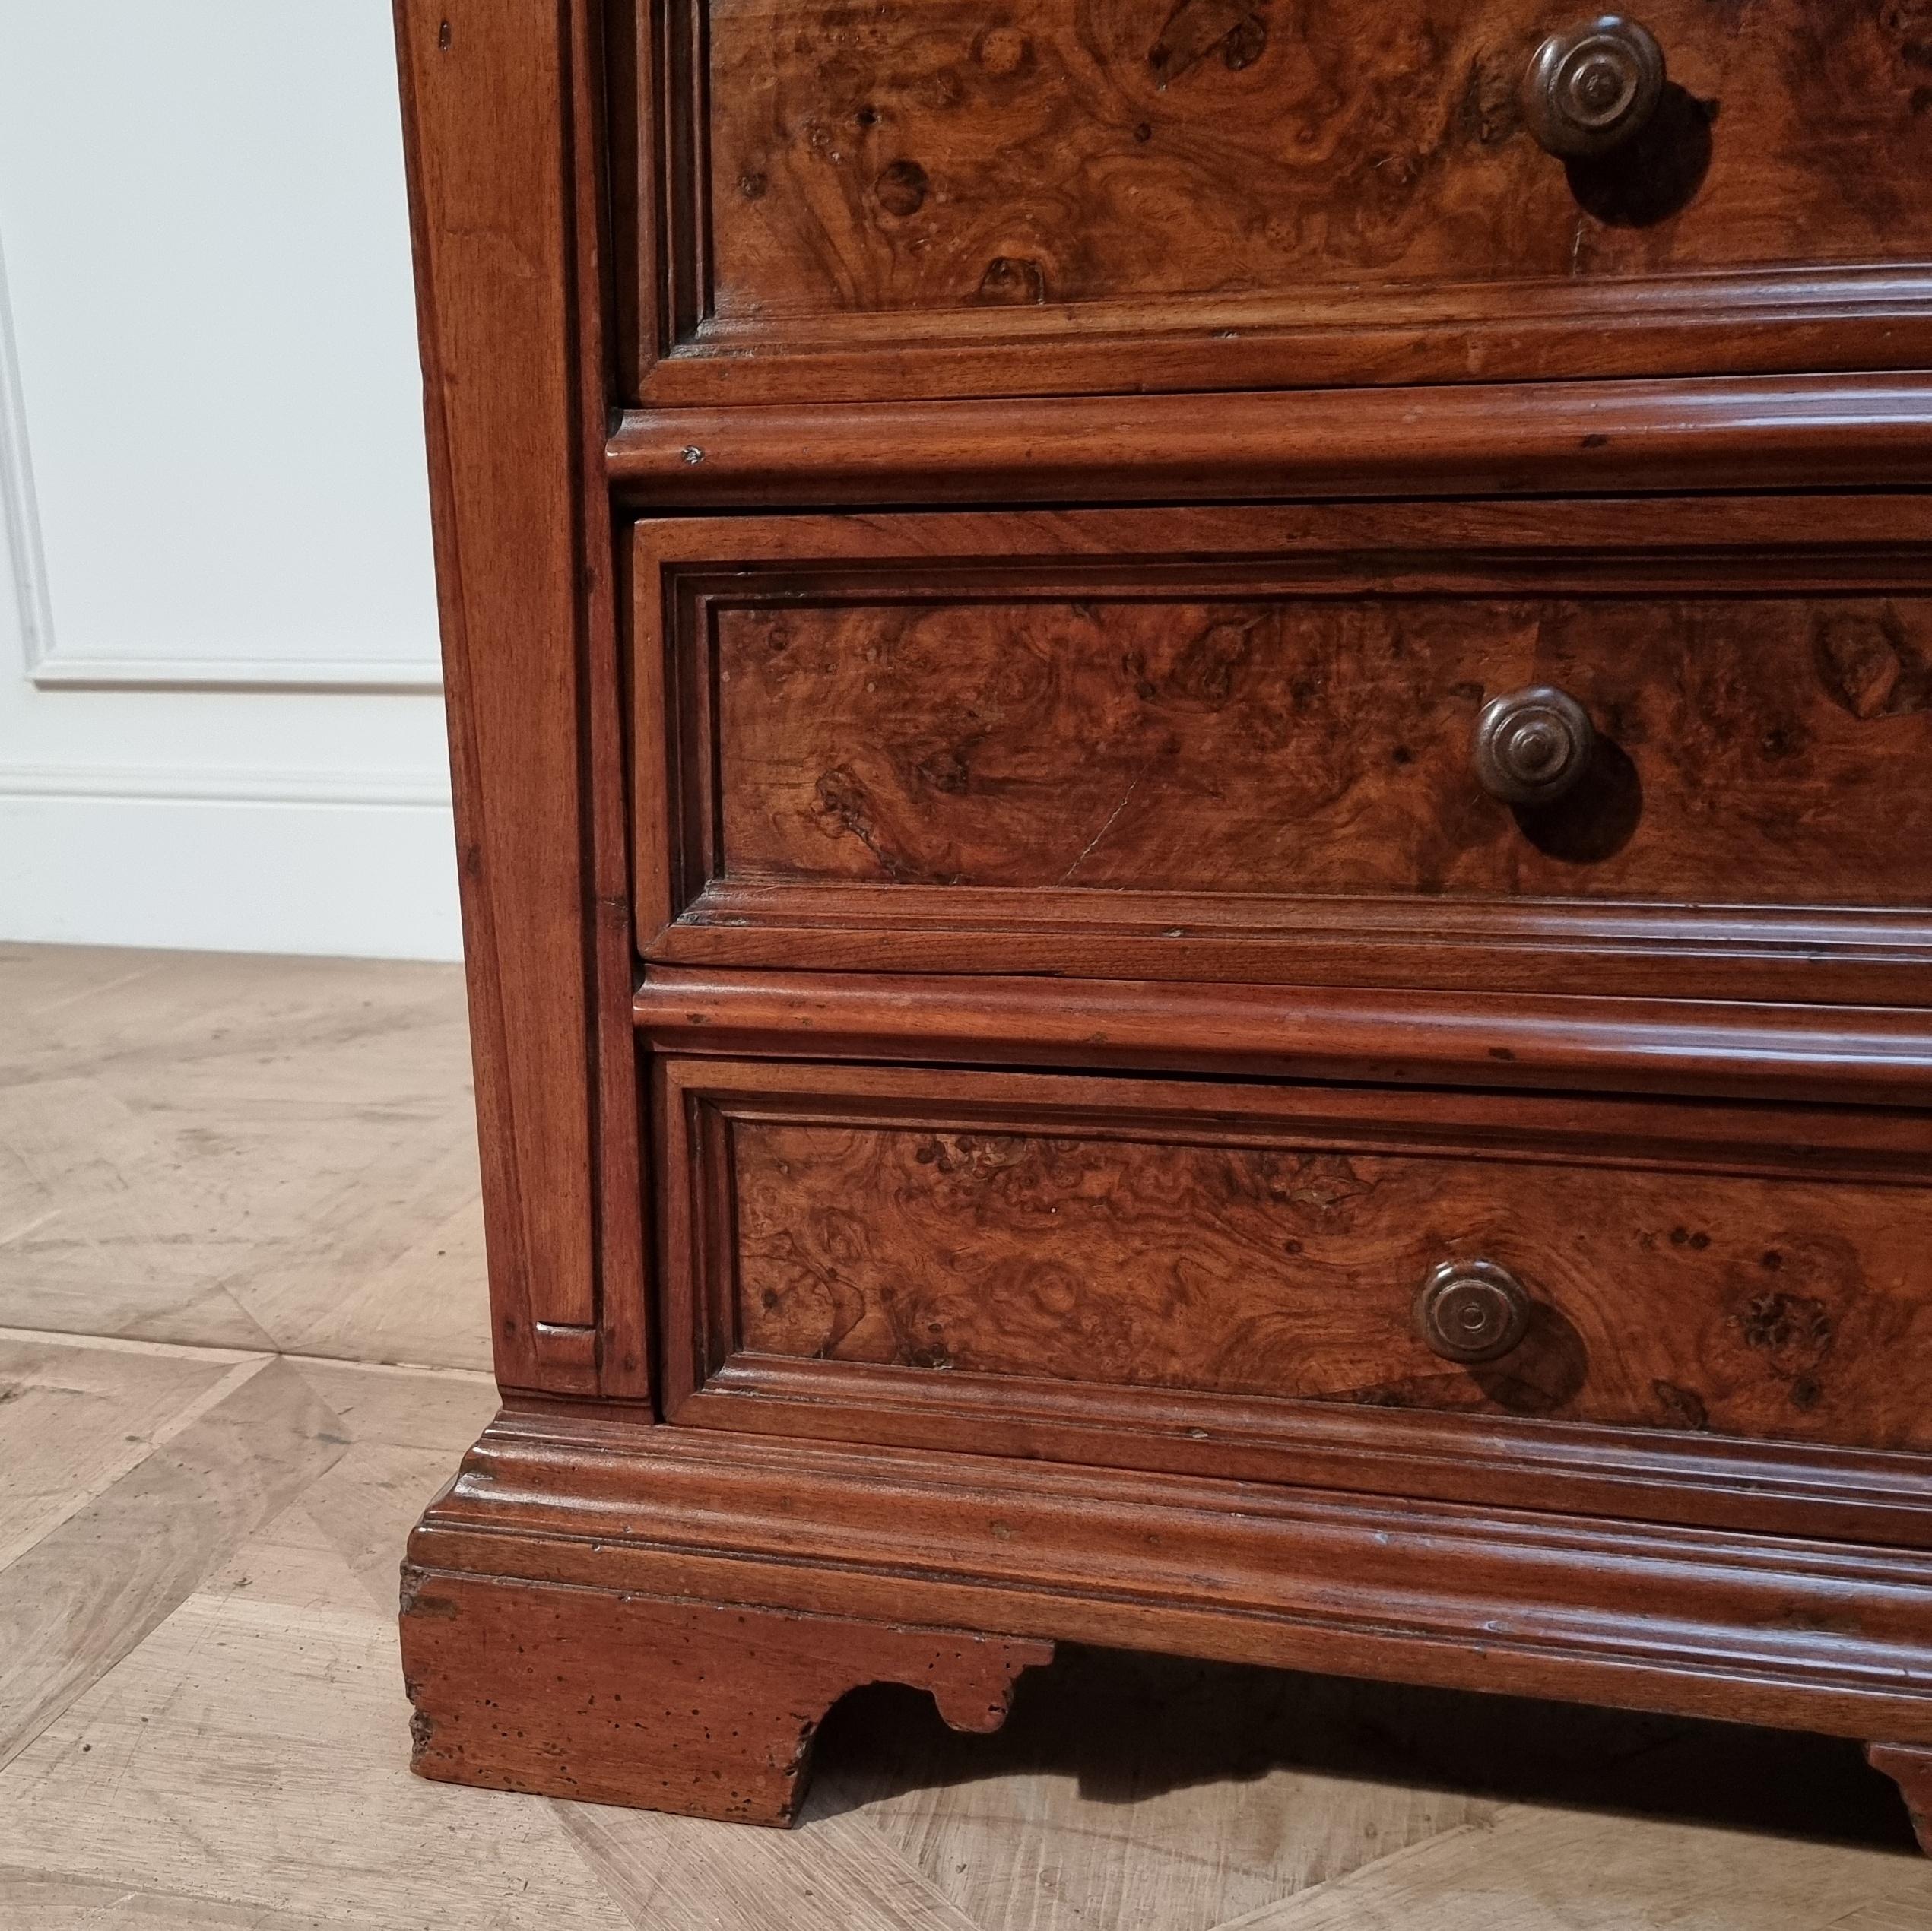 19th Century Italian Bedside Chest of Drawers